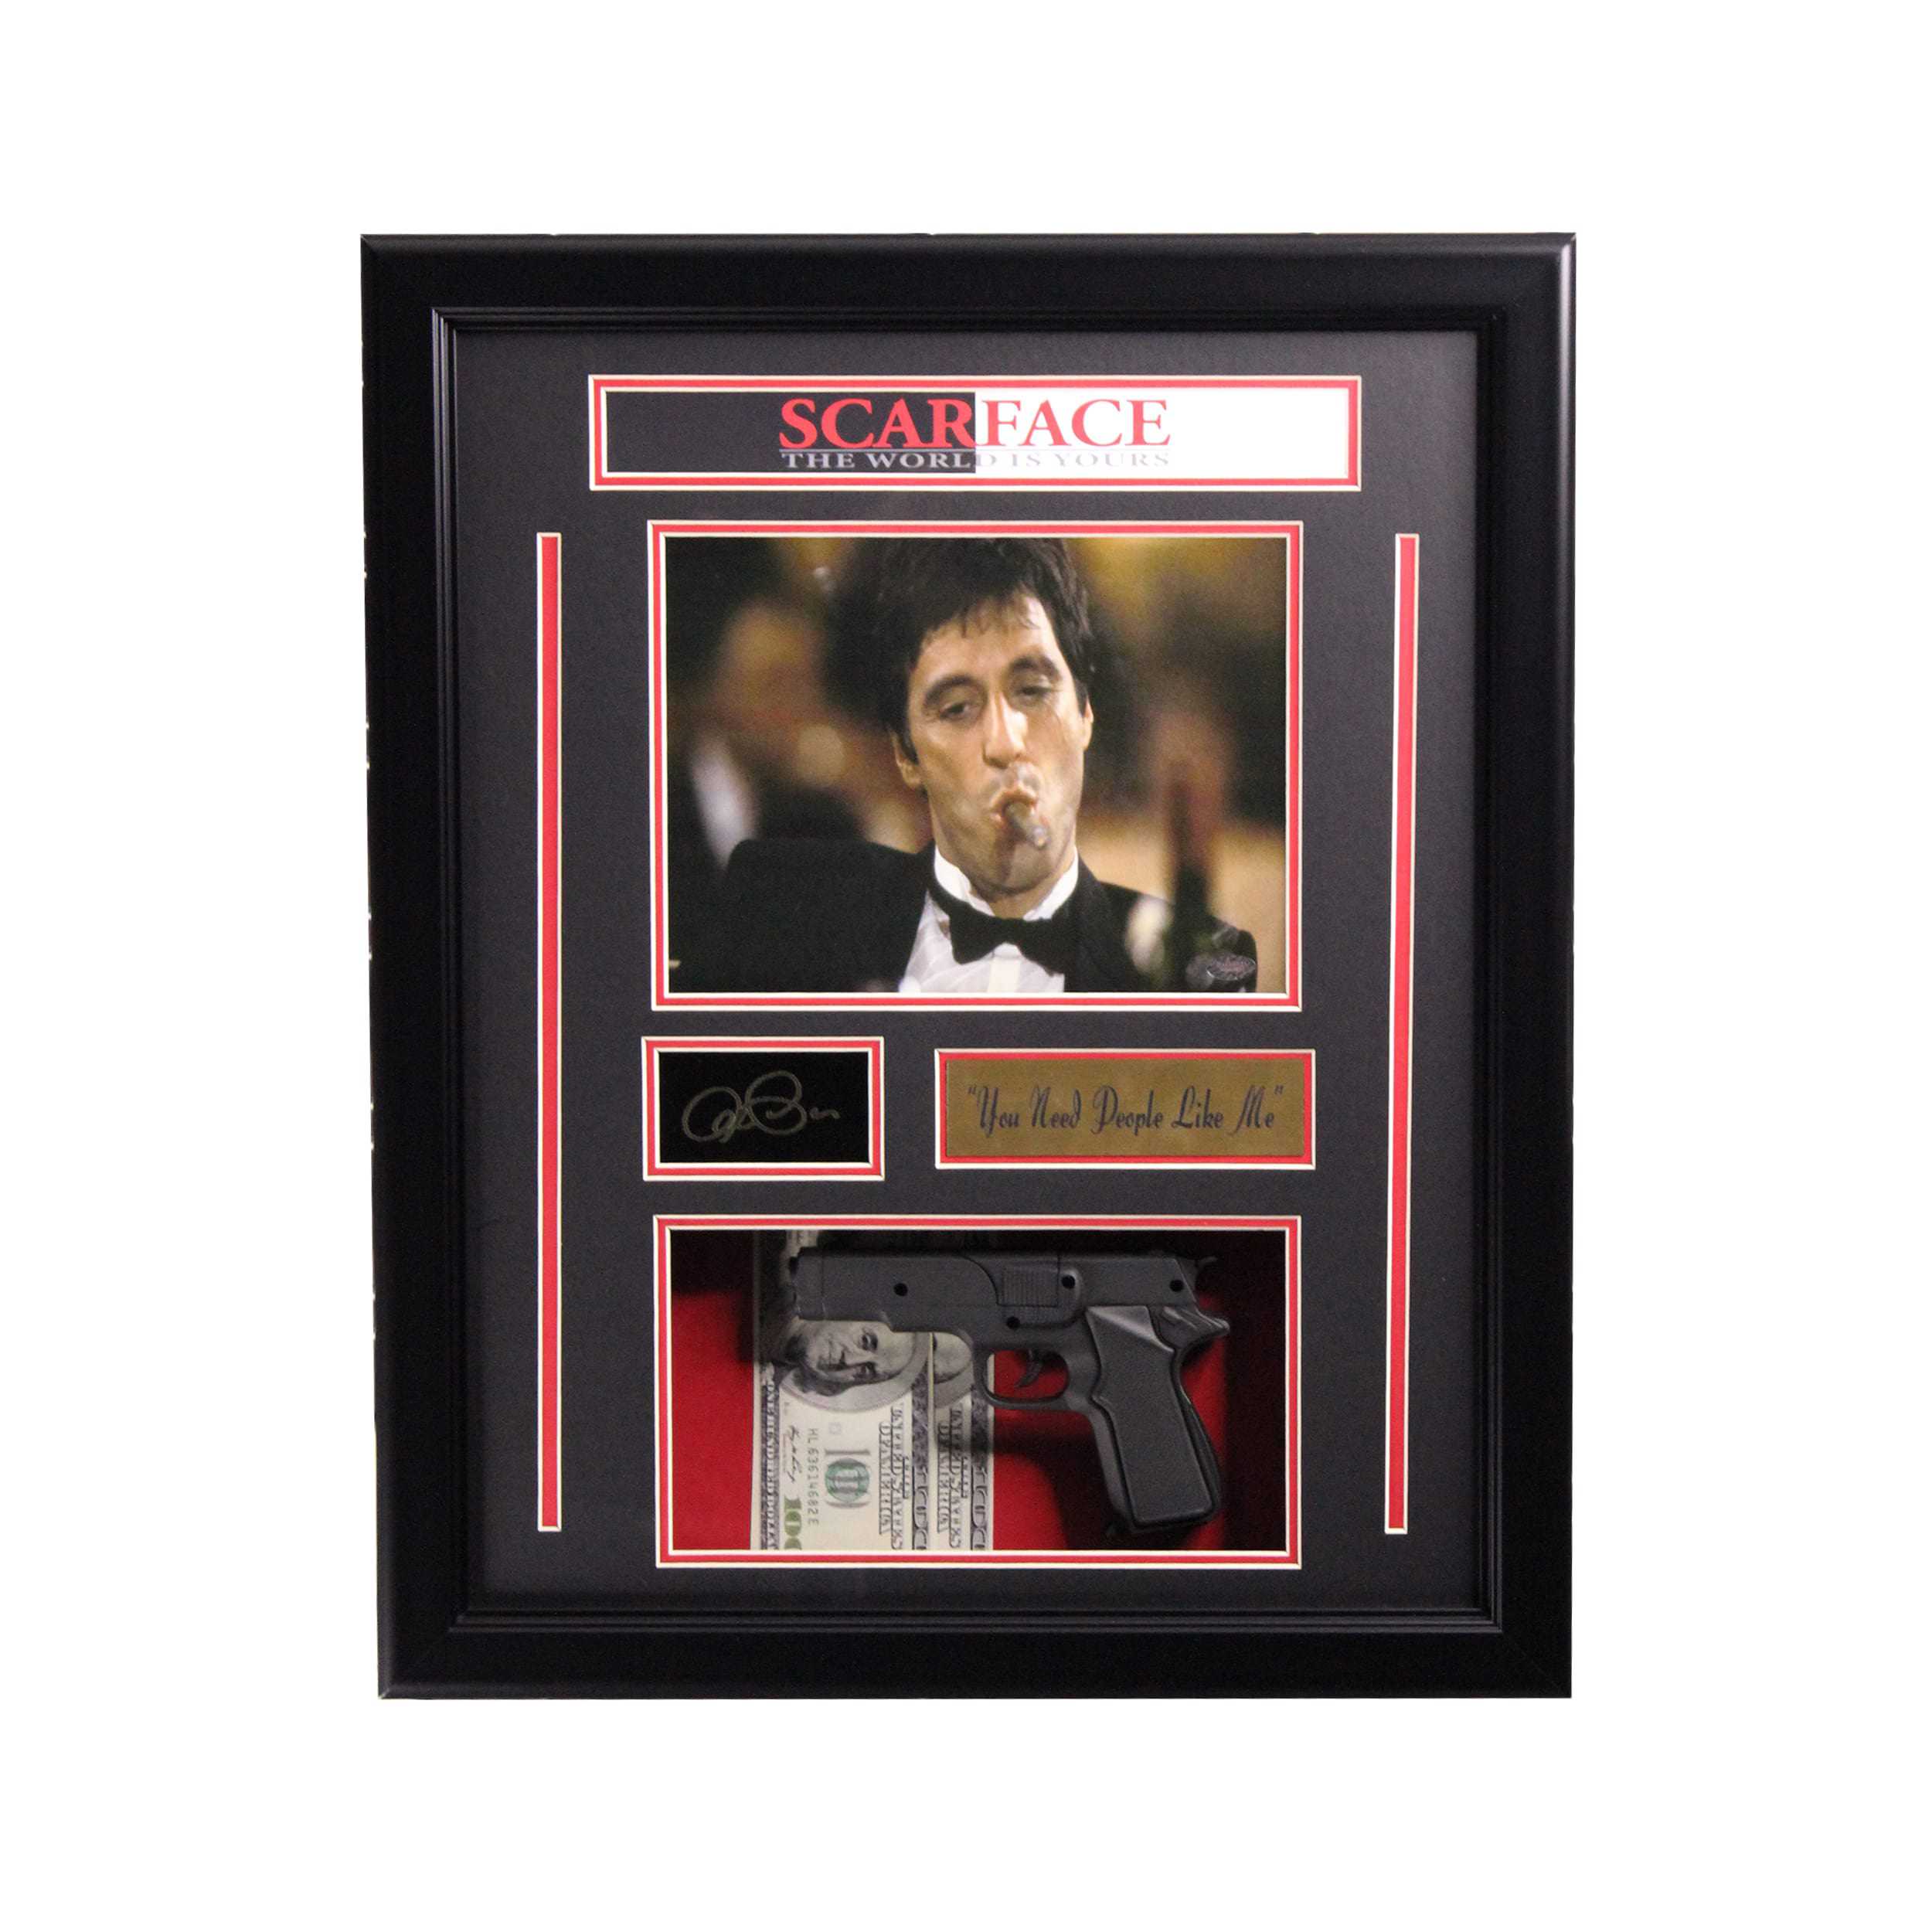 Scarface - The World Is Yours - Framed